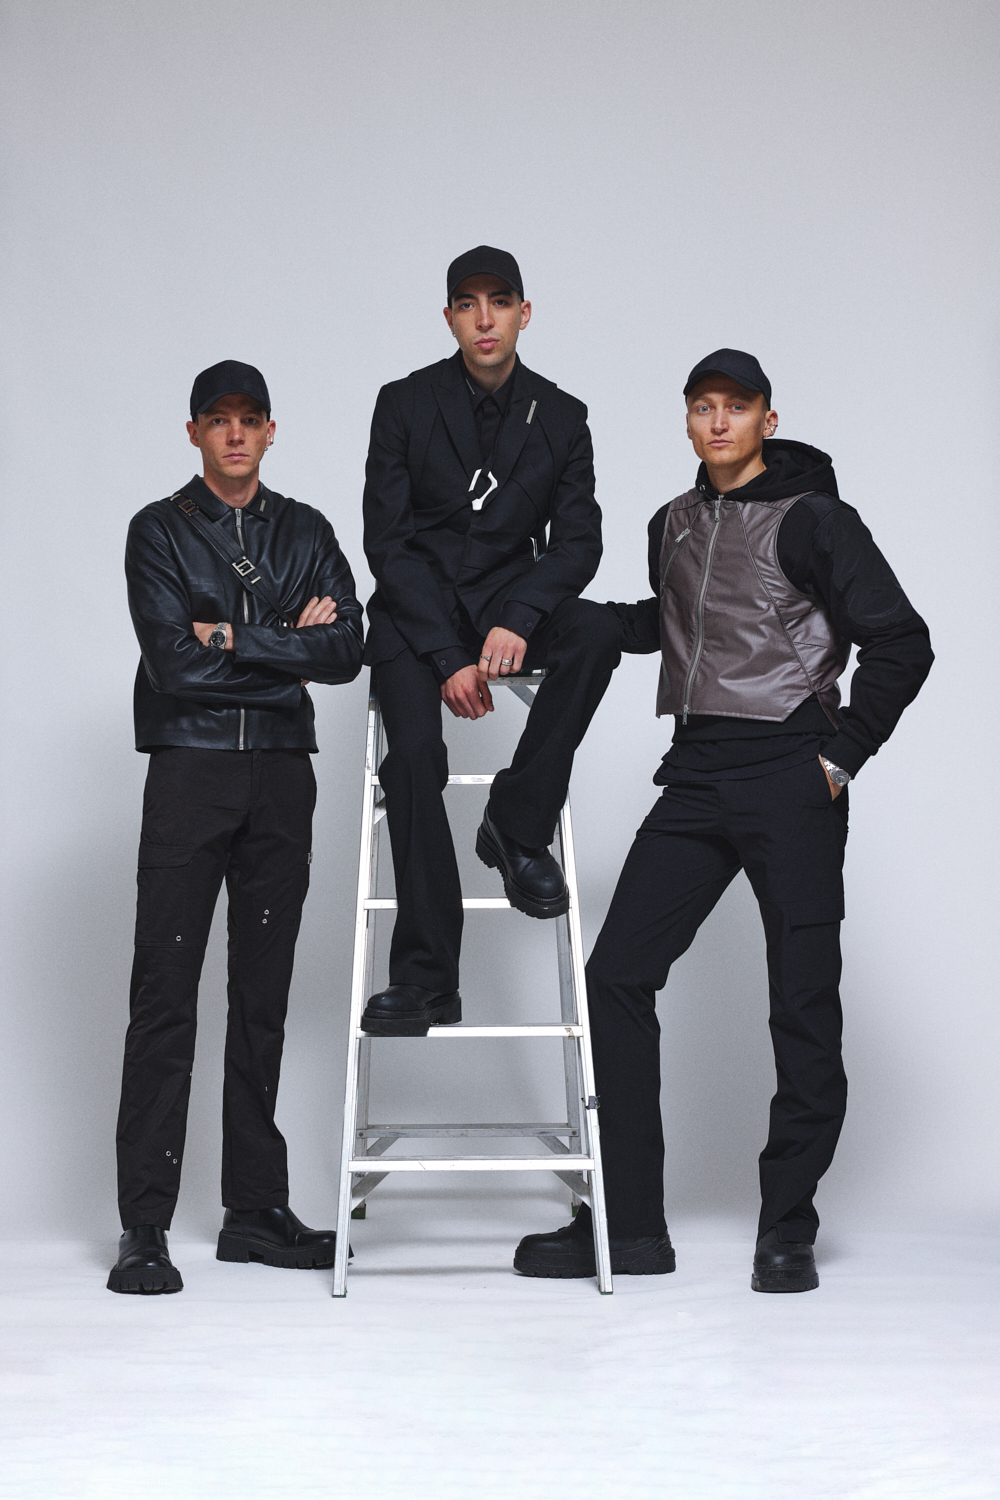  Designers Victor and Julius Juul photographed with muse: Fabio Caldera